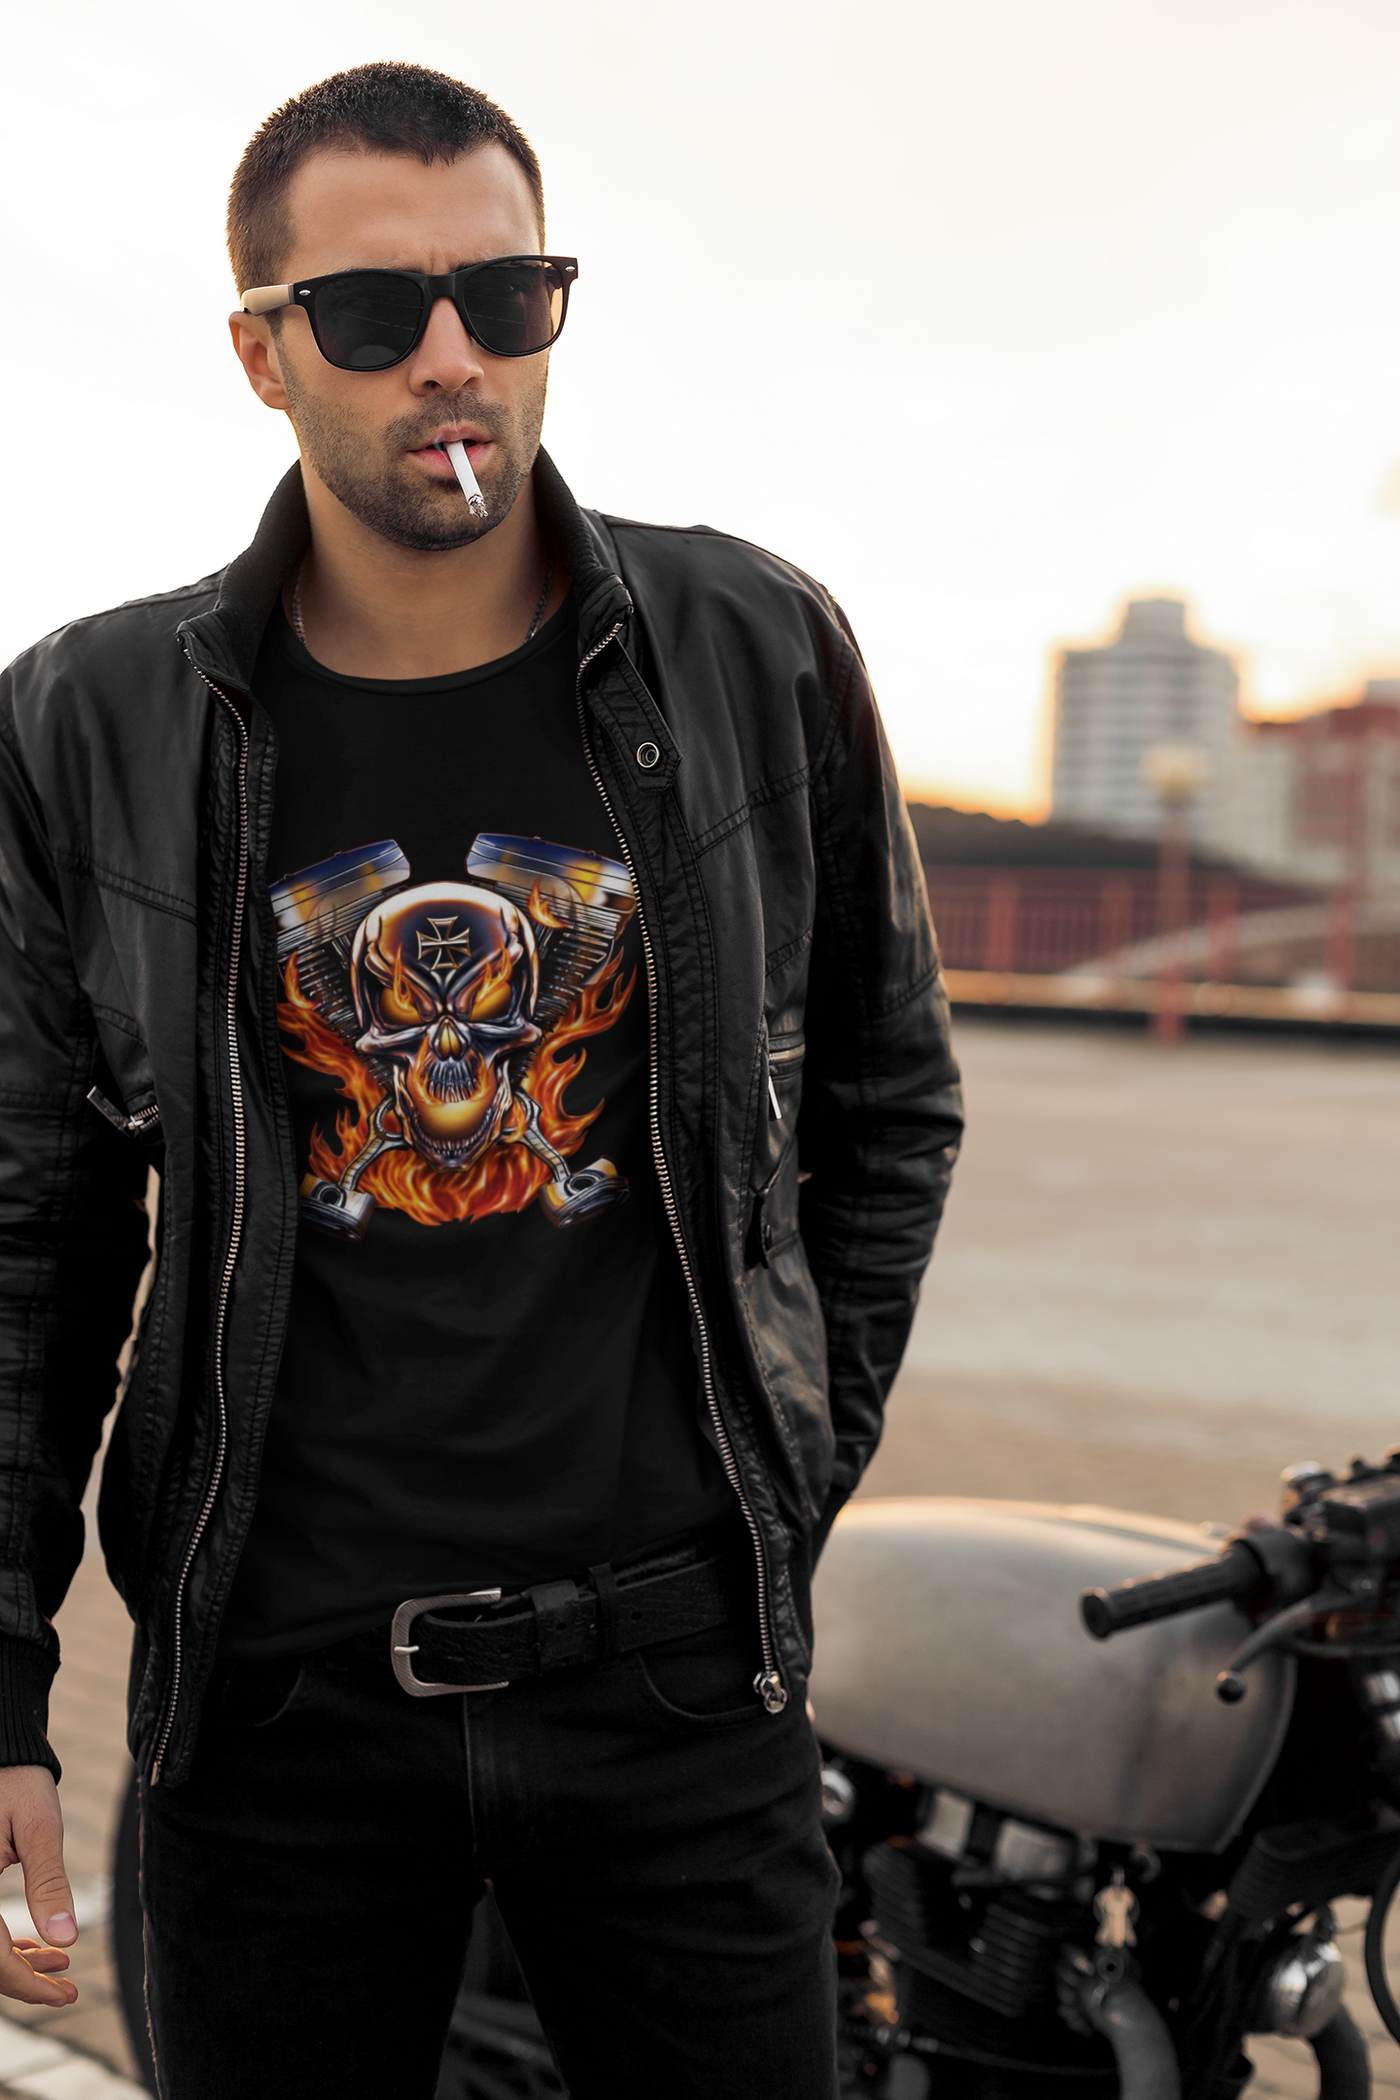 Best t shirts online India for men and women.bikers,motorcycle riders